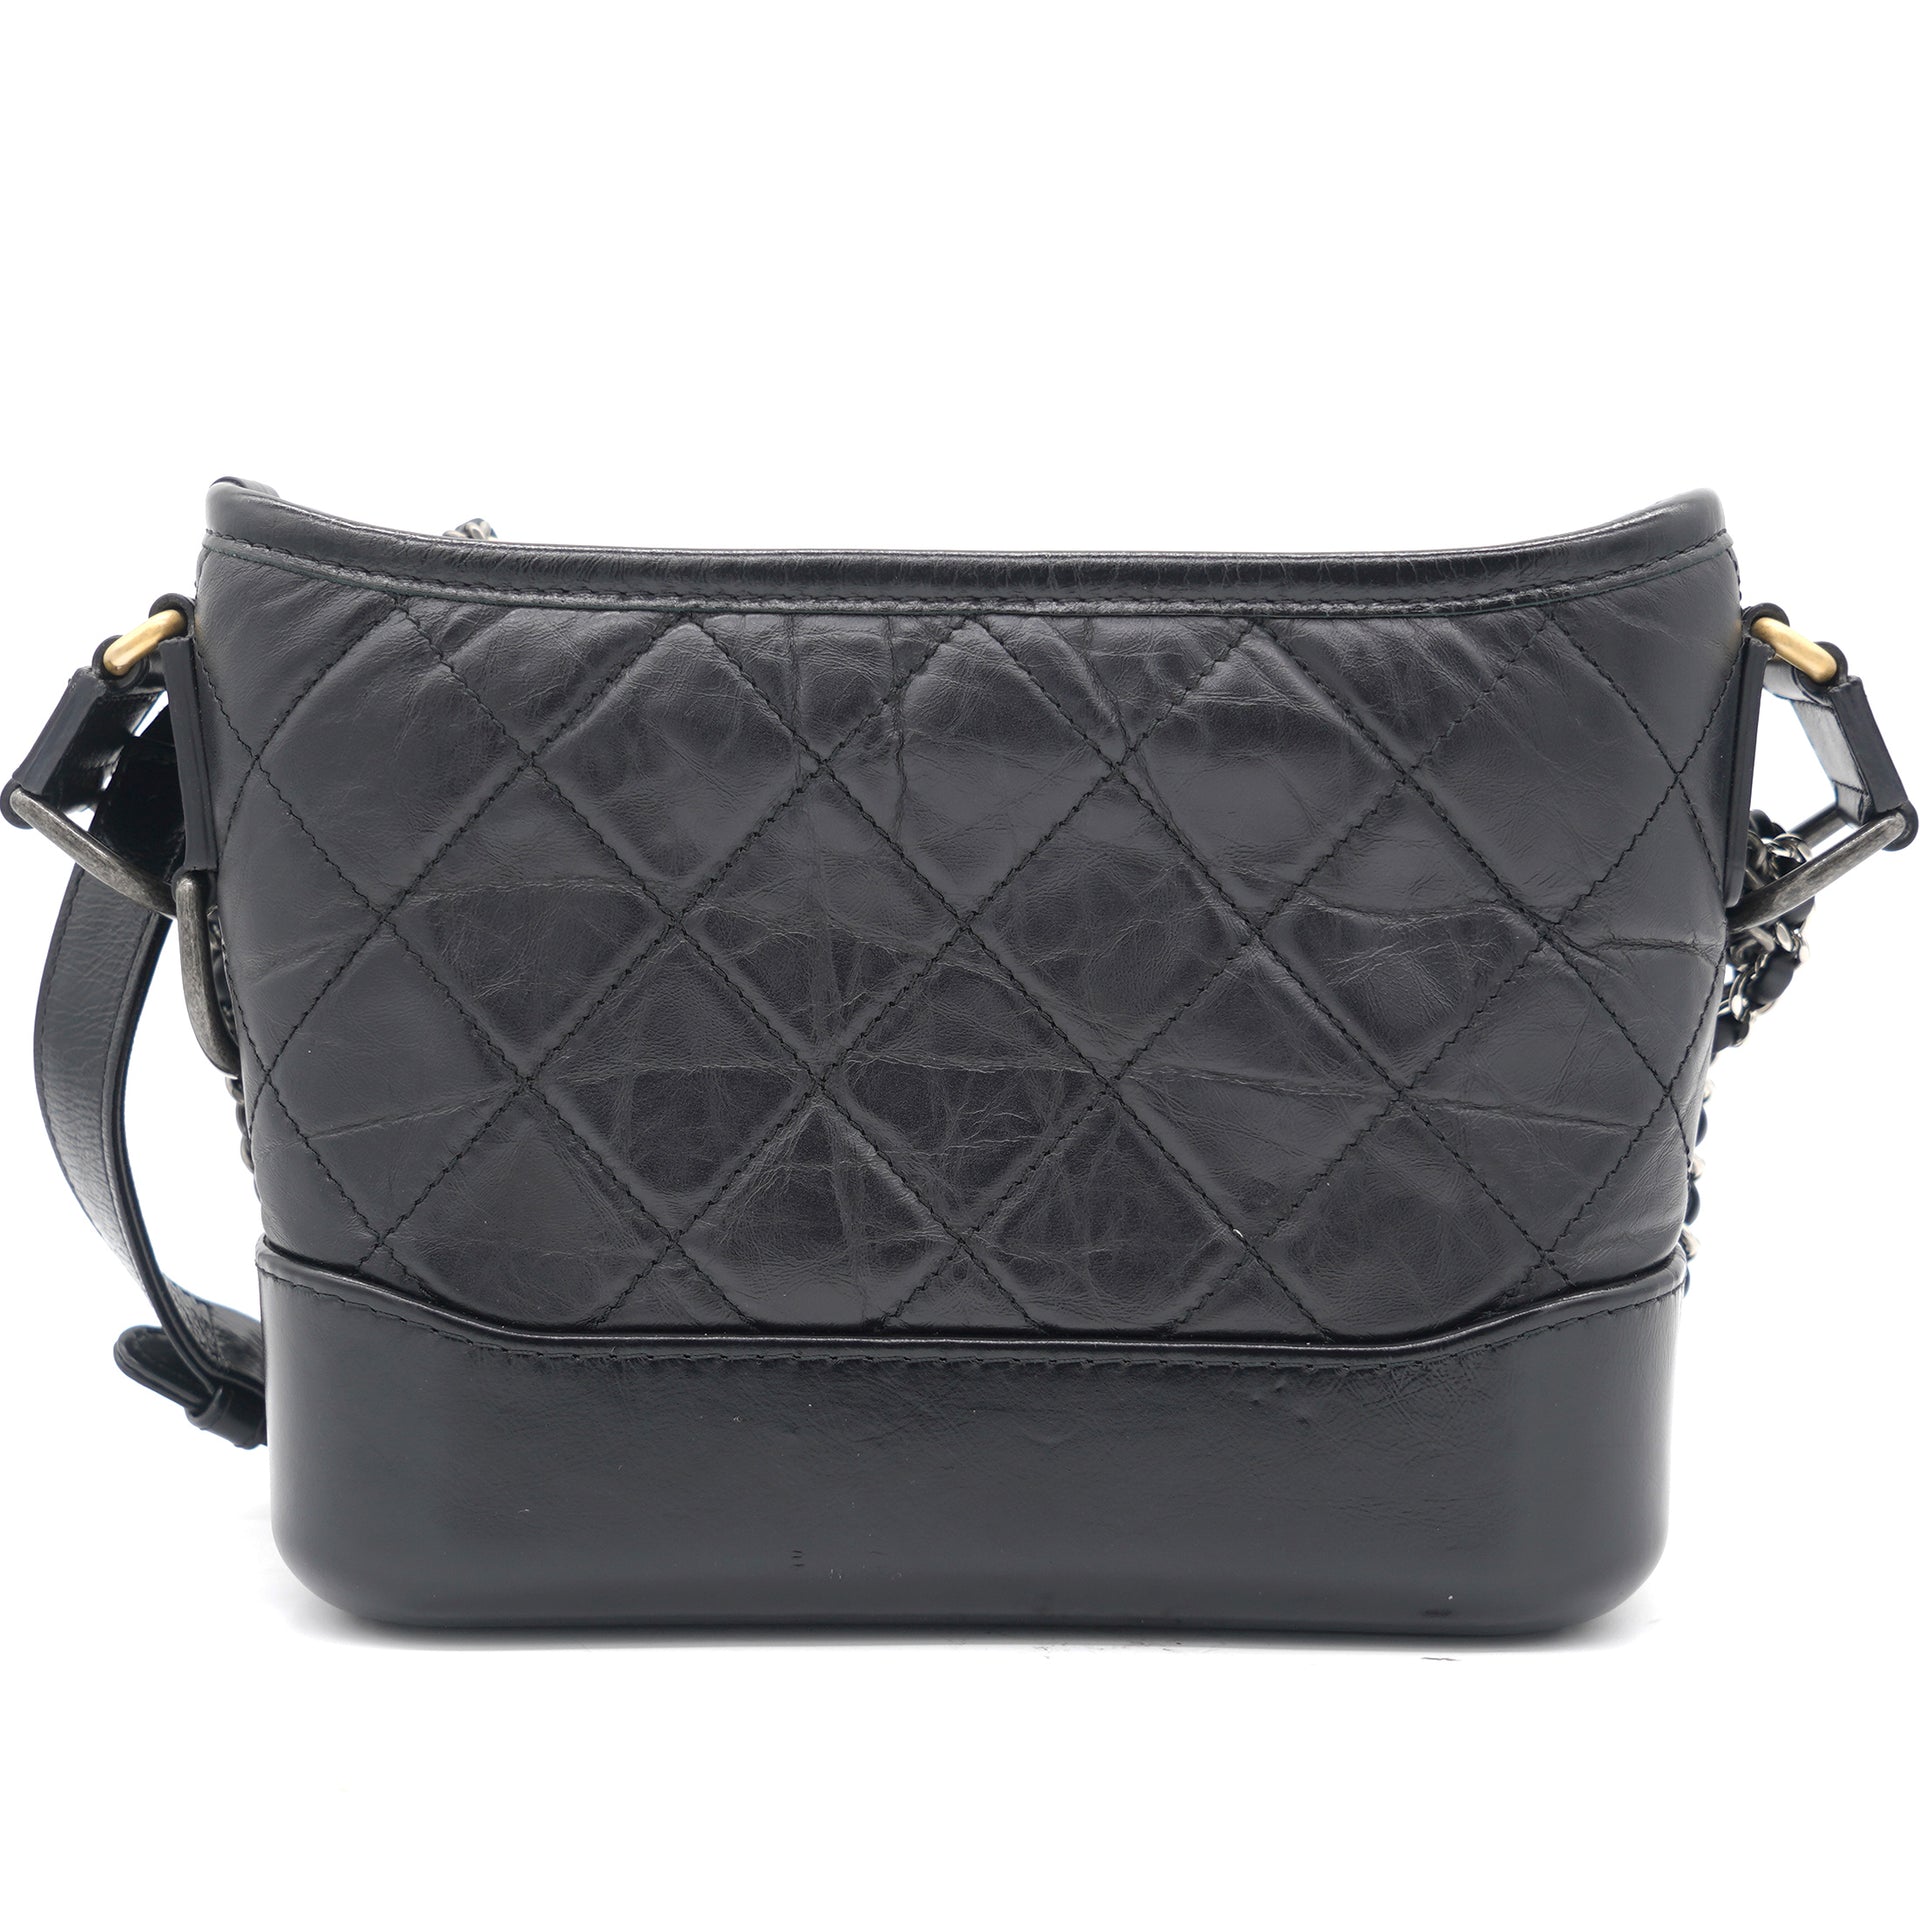 Chanel Gabrielle Hobo Bag Diamond Gabrielle Quilted Aged/Smooth Small Black  - US